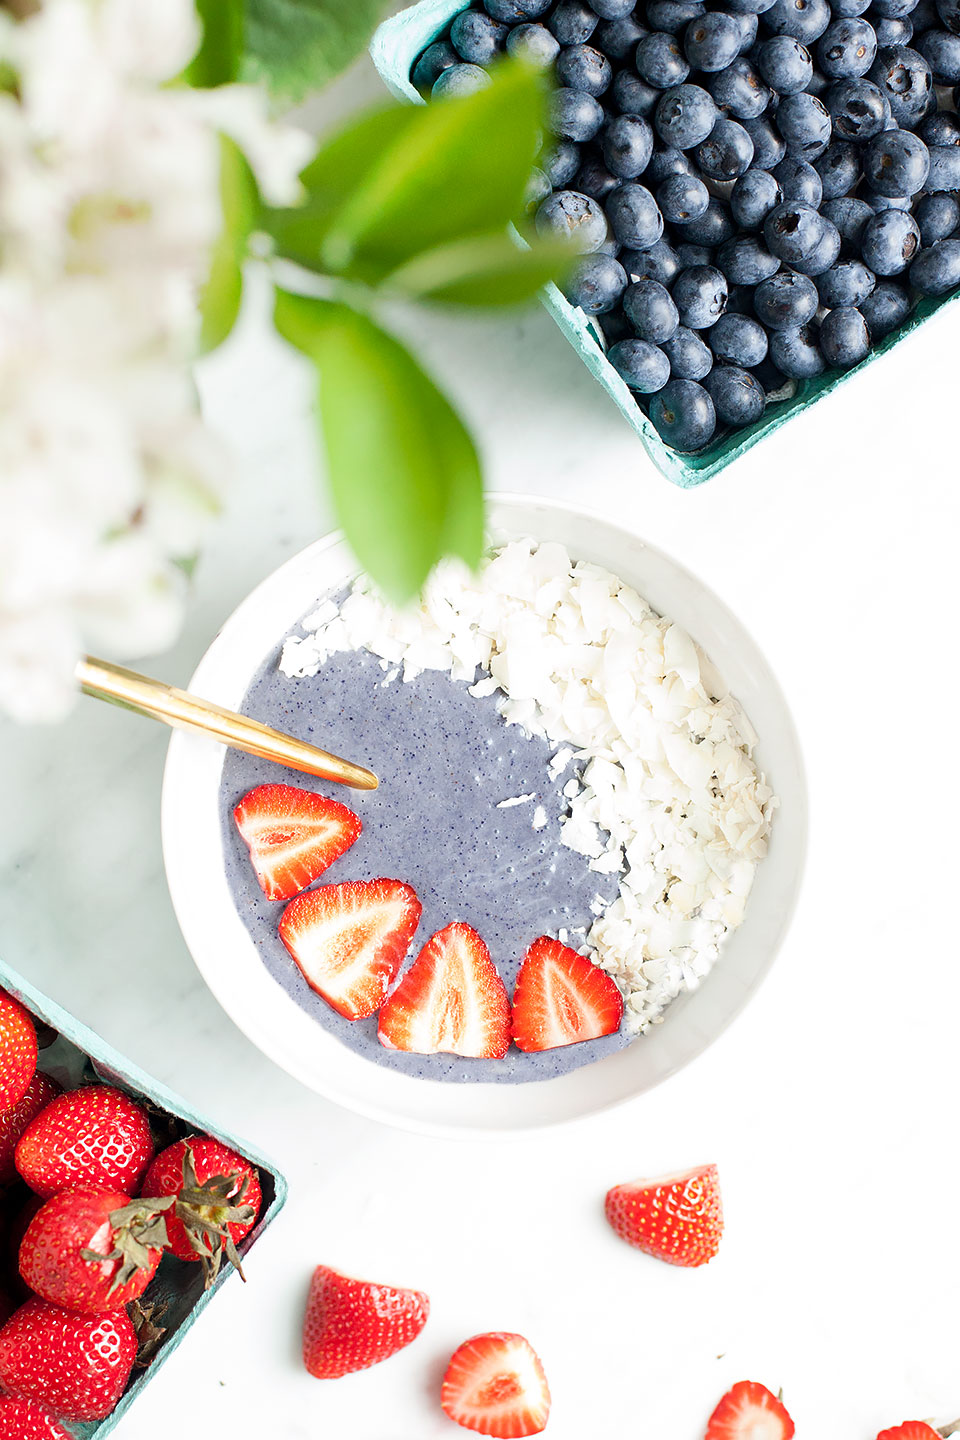 BLUEBERRY SMOOTHIE BOWLS